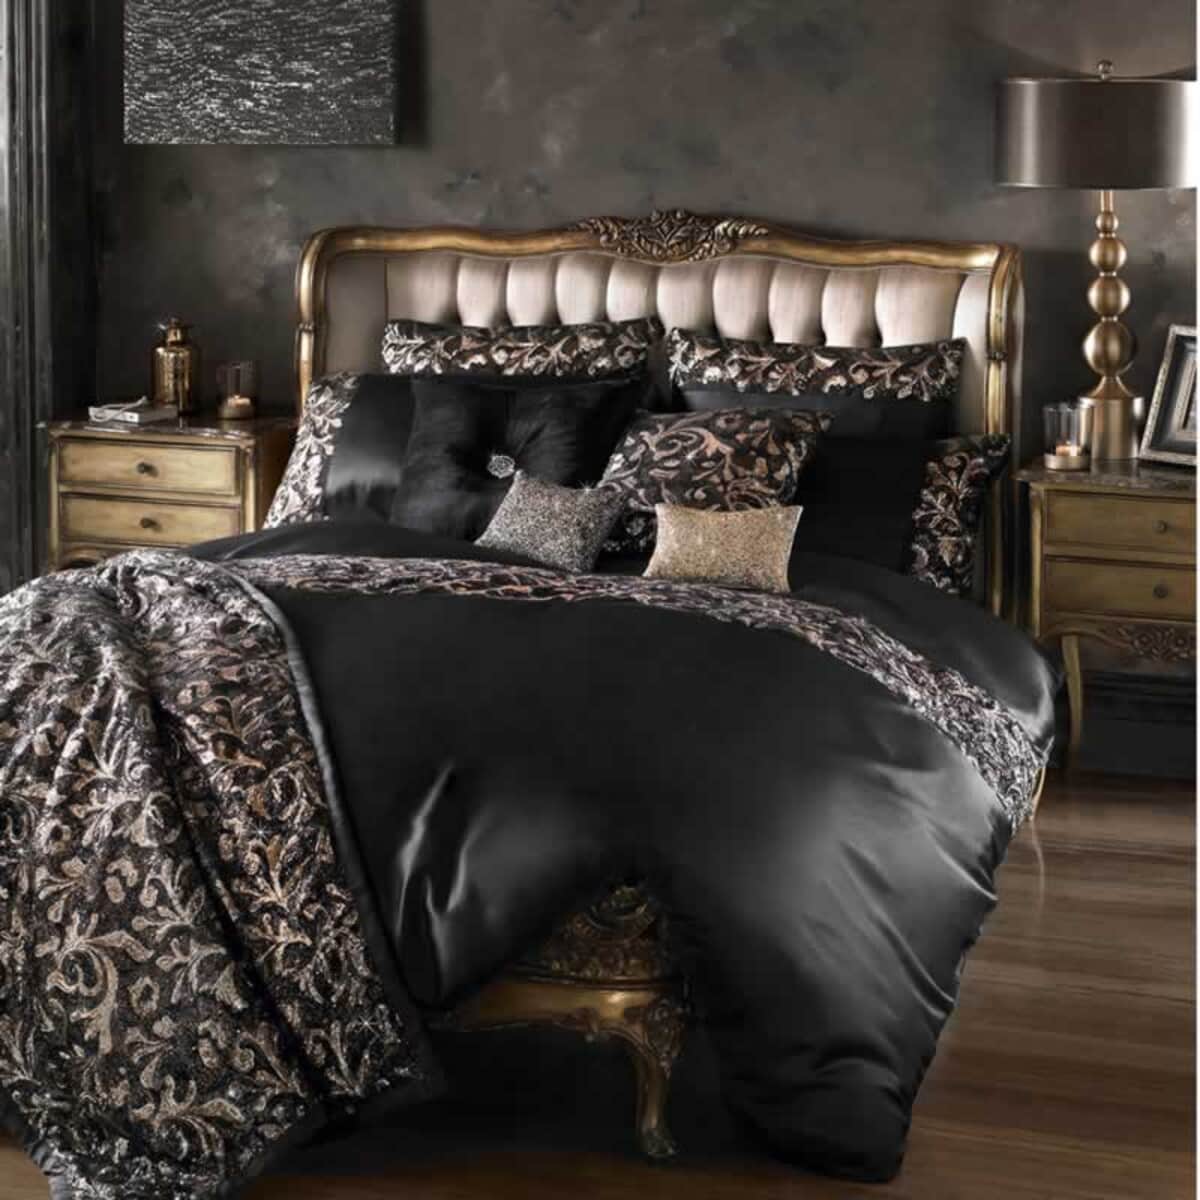 Kylie at Home Lazzaro Black large